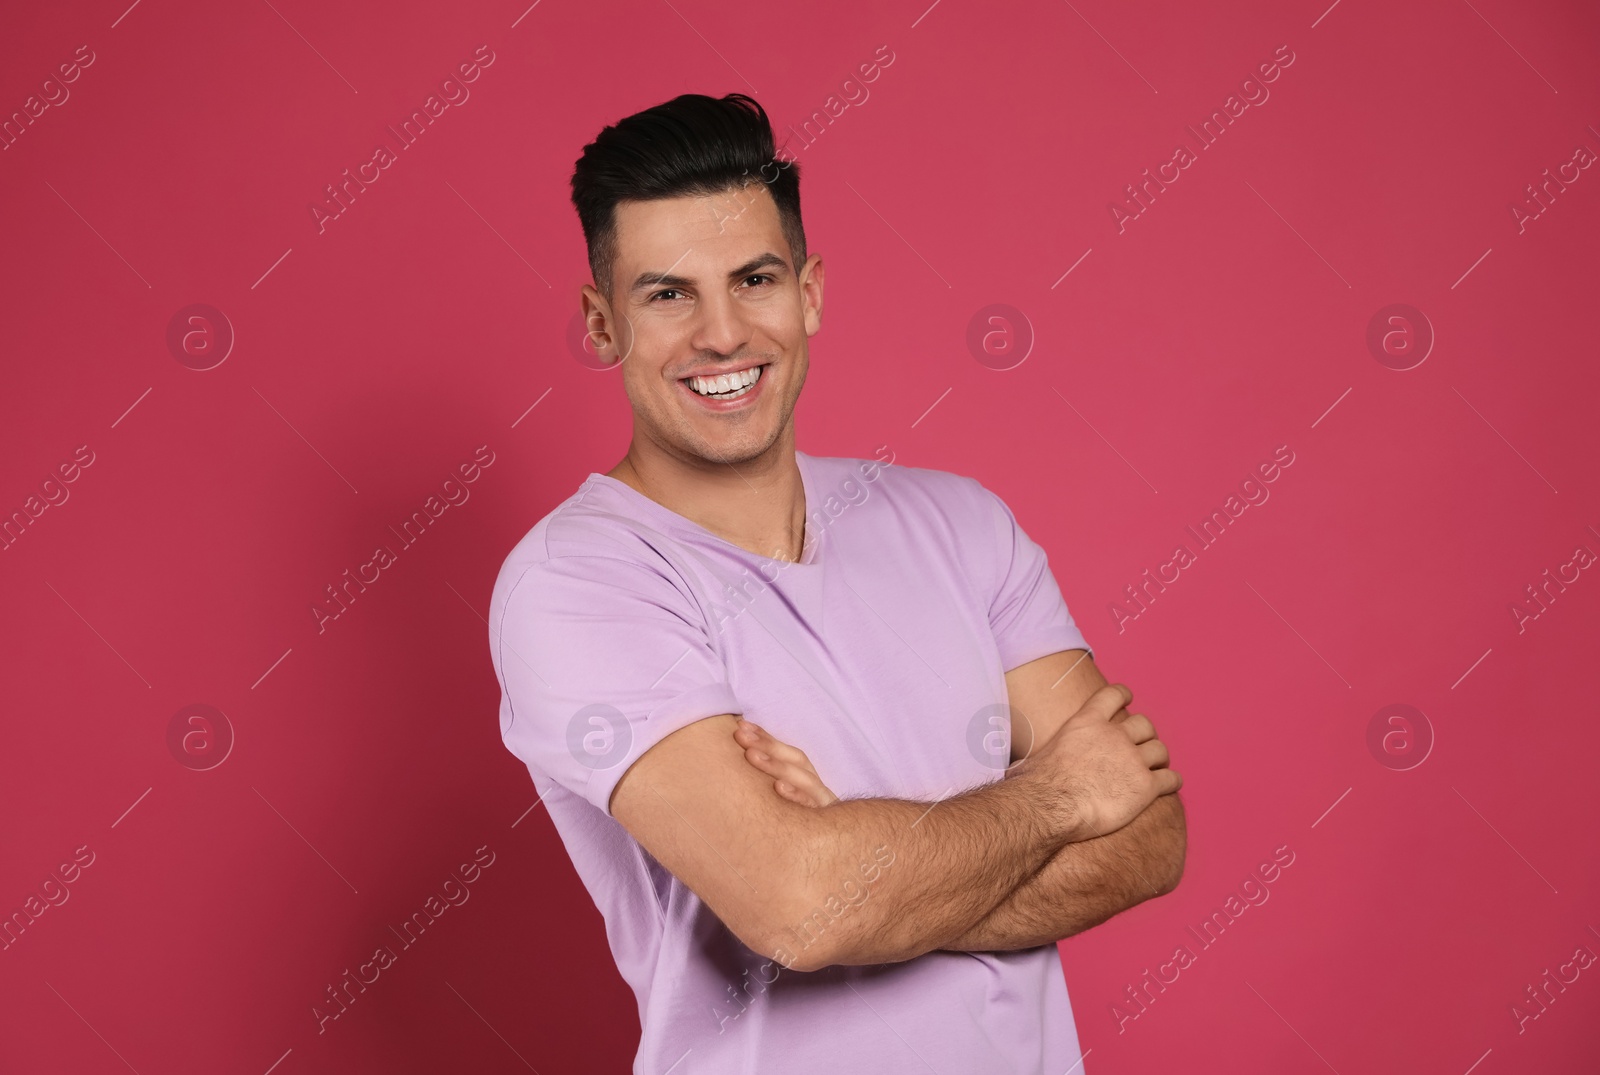 Photo of Handsome man laughing on pink background. Funny joke